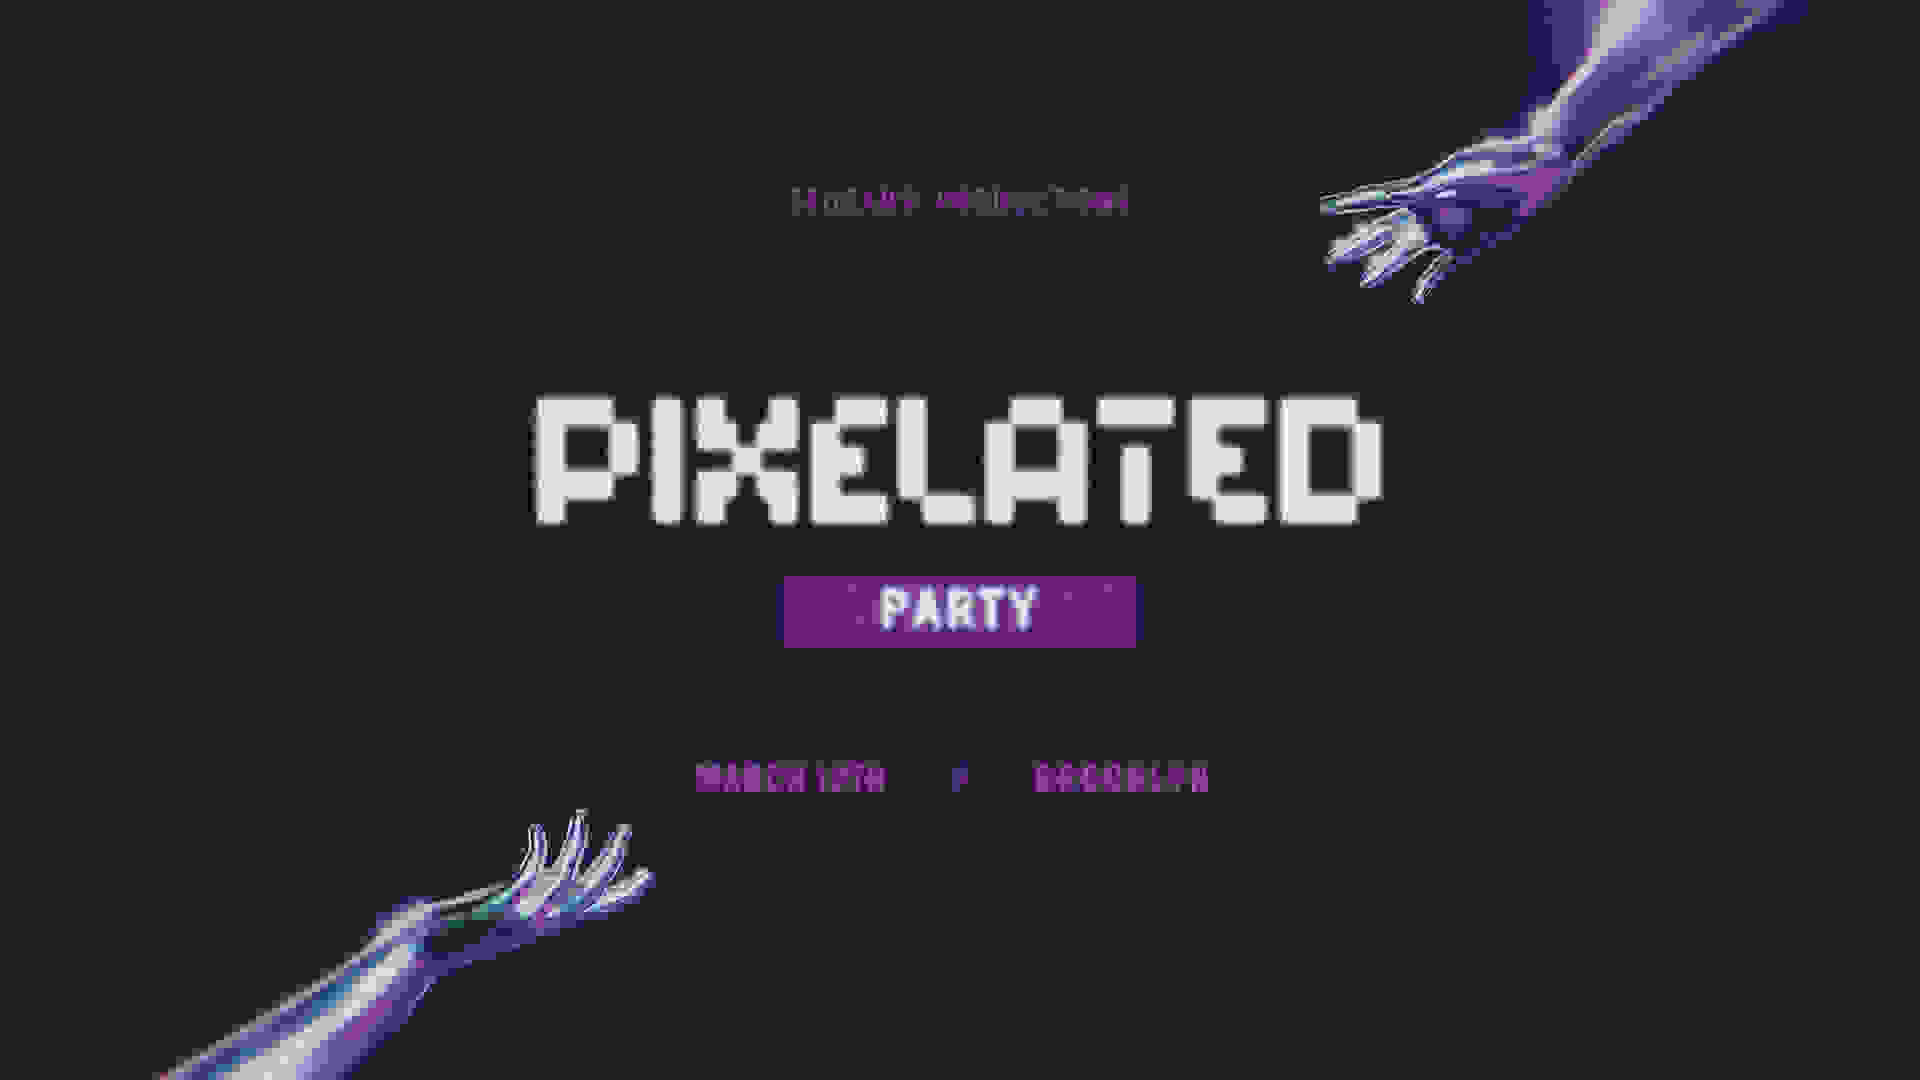 PIXELATED PARTY | Brooklyn, New York